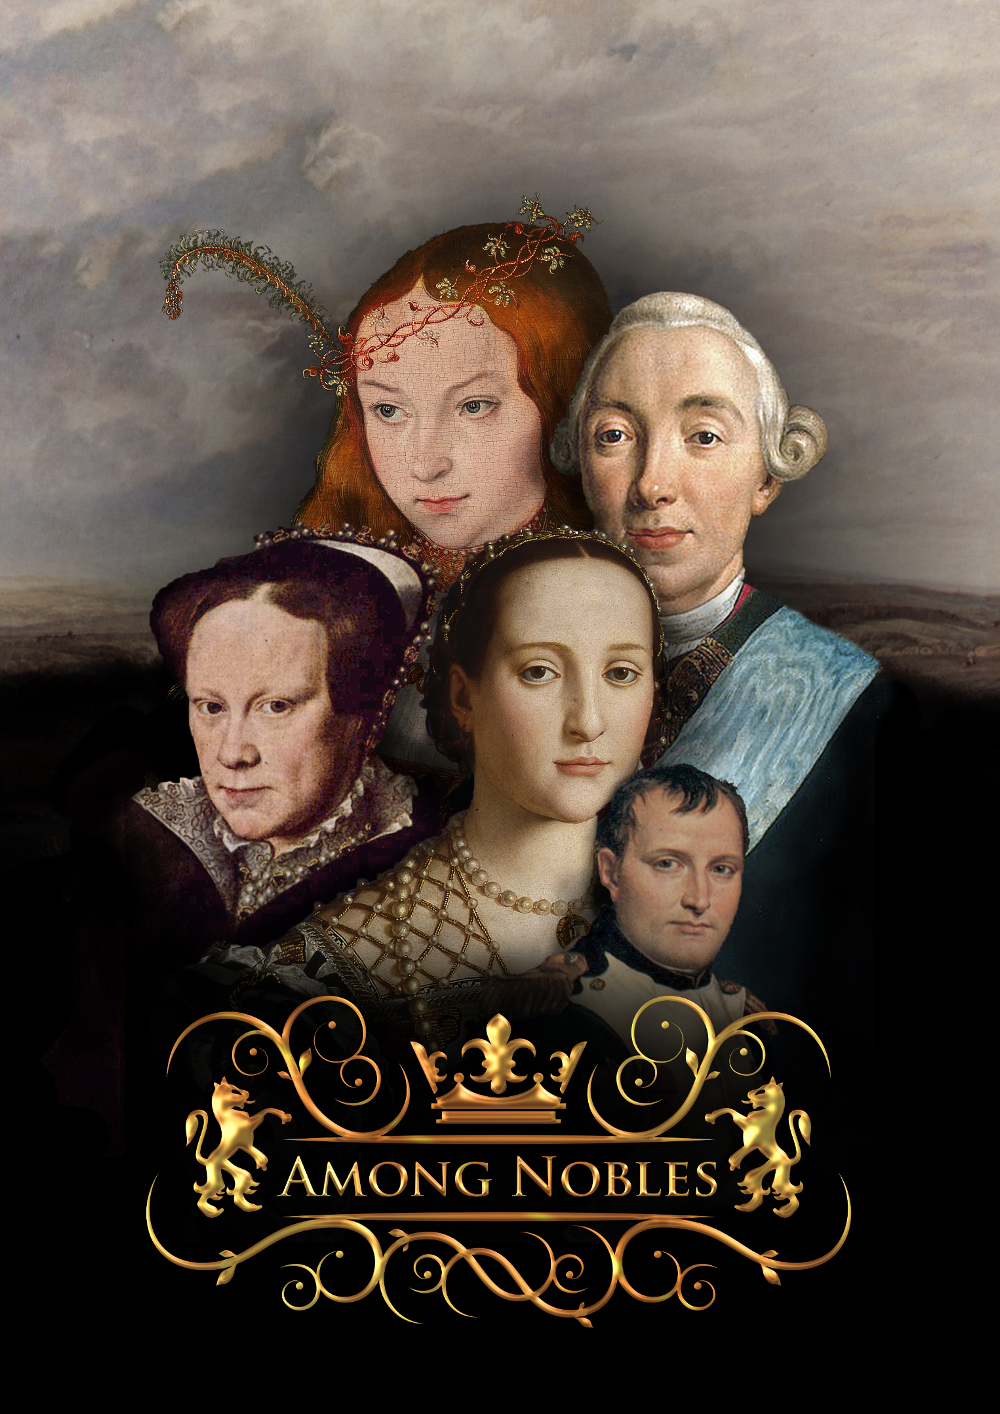 Among Nobles